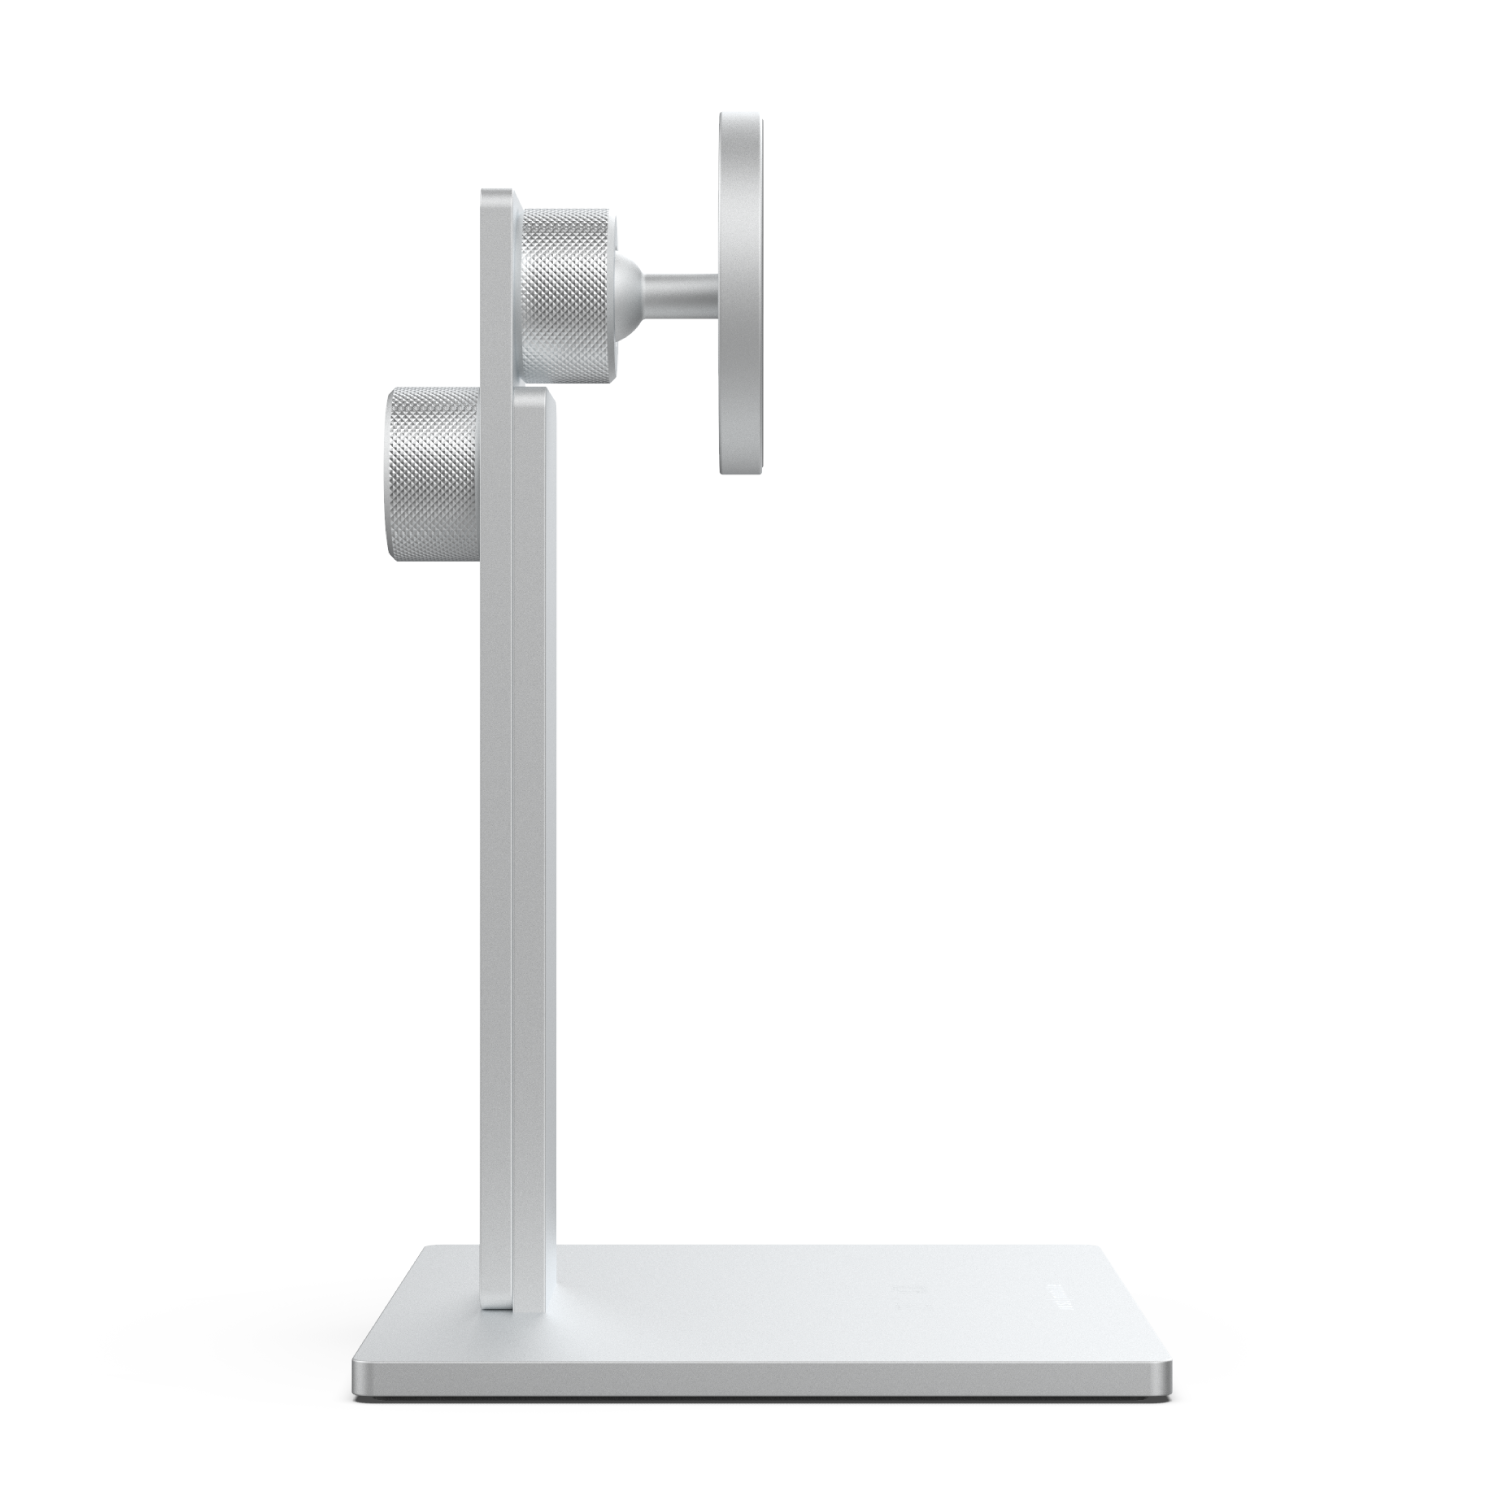 JustMobile AluDisc Max Tablet Stand - Storming Gravity